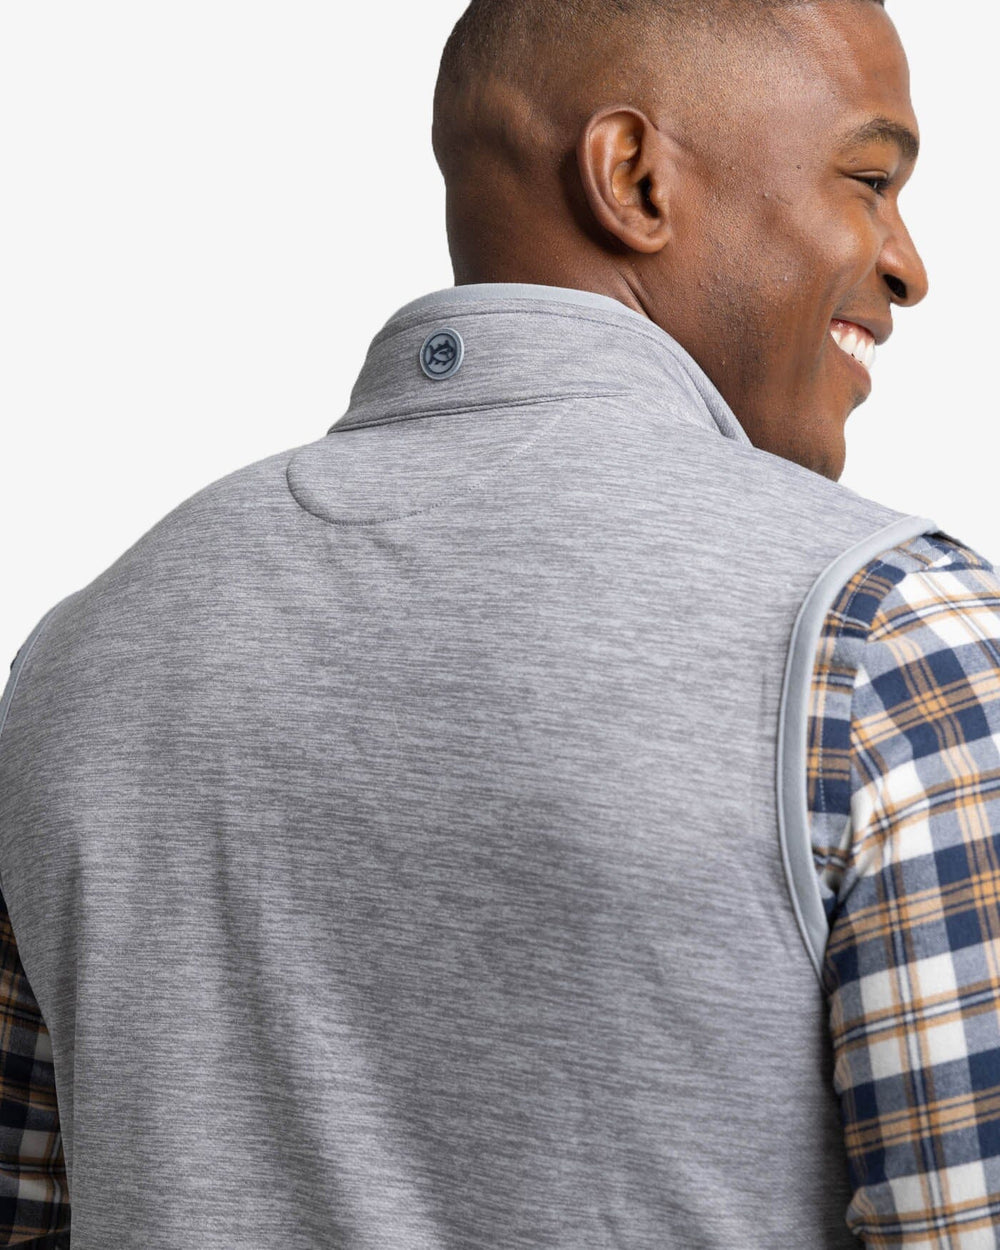 The back view of the Southern Tide Baybrook Heather Vest by Southern Tide - Heather Ultimate Grey